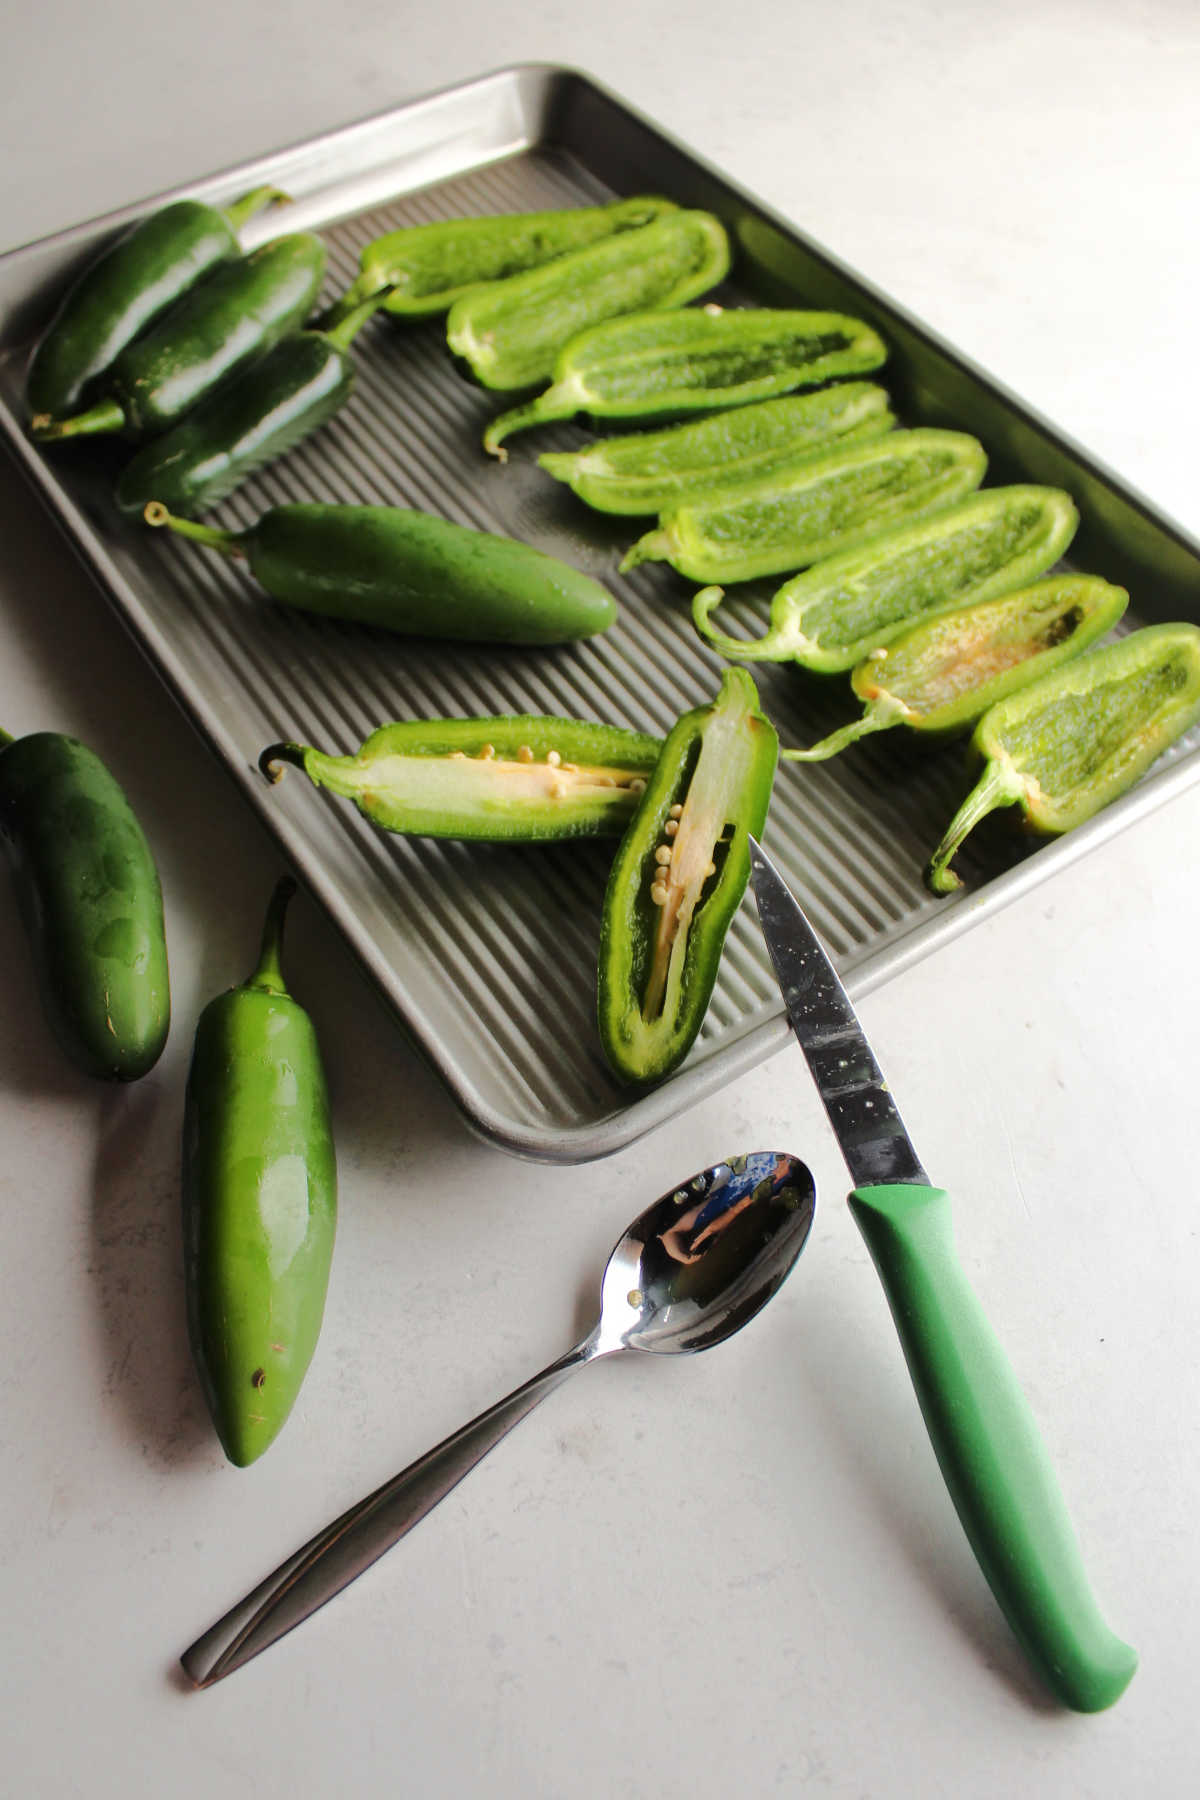 Cutting jalapenos in half and cleaning out the centers.